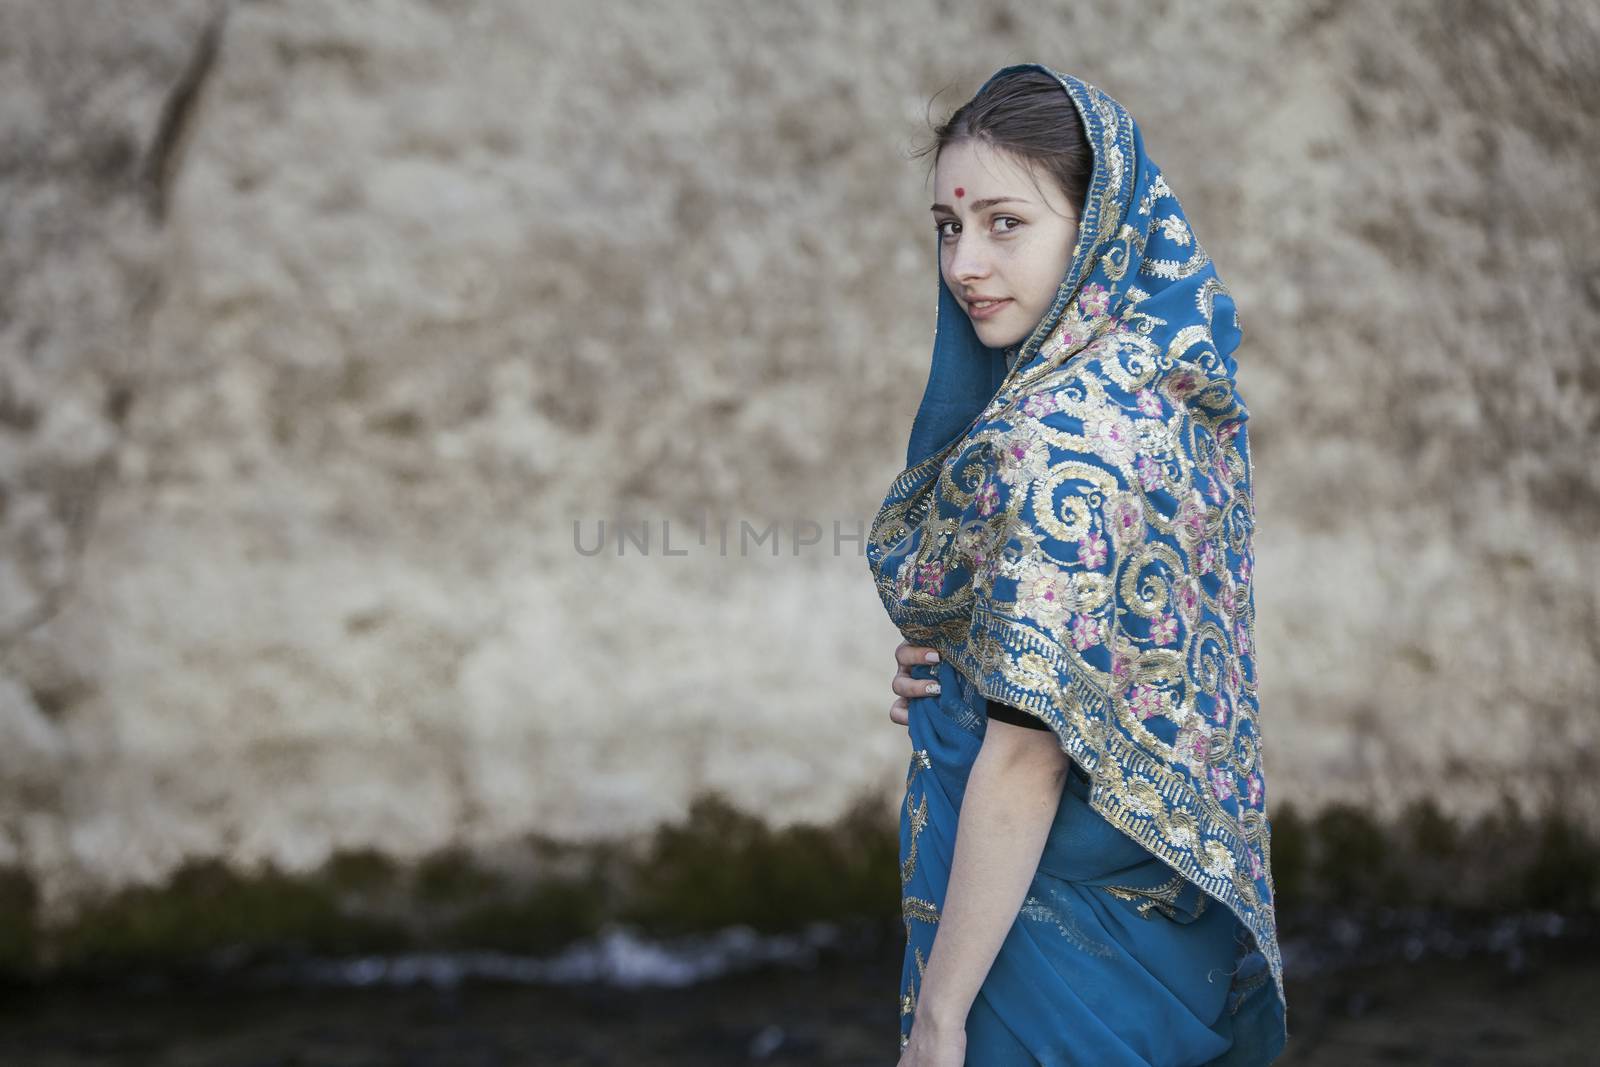 The girl poses in the Indian sari by snep_photo